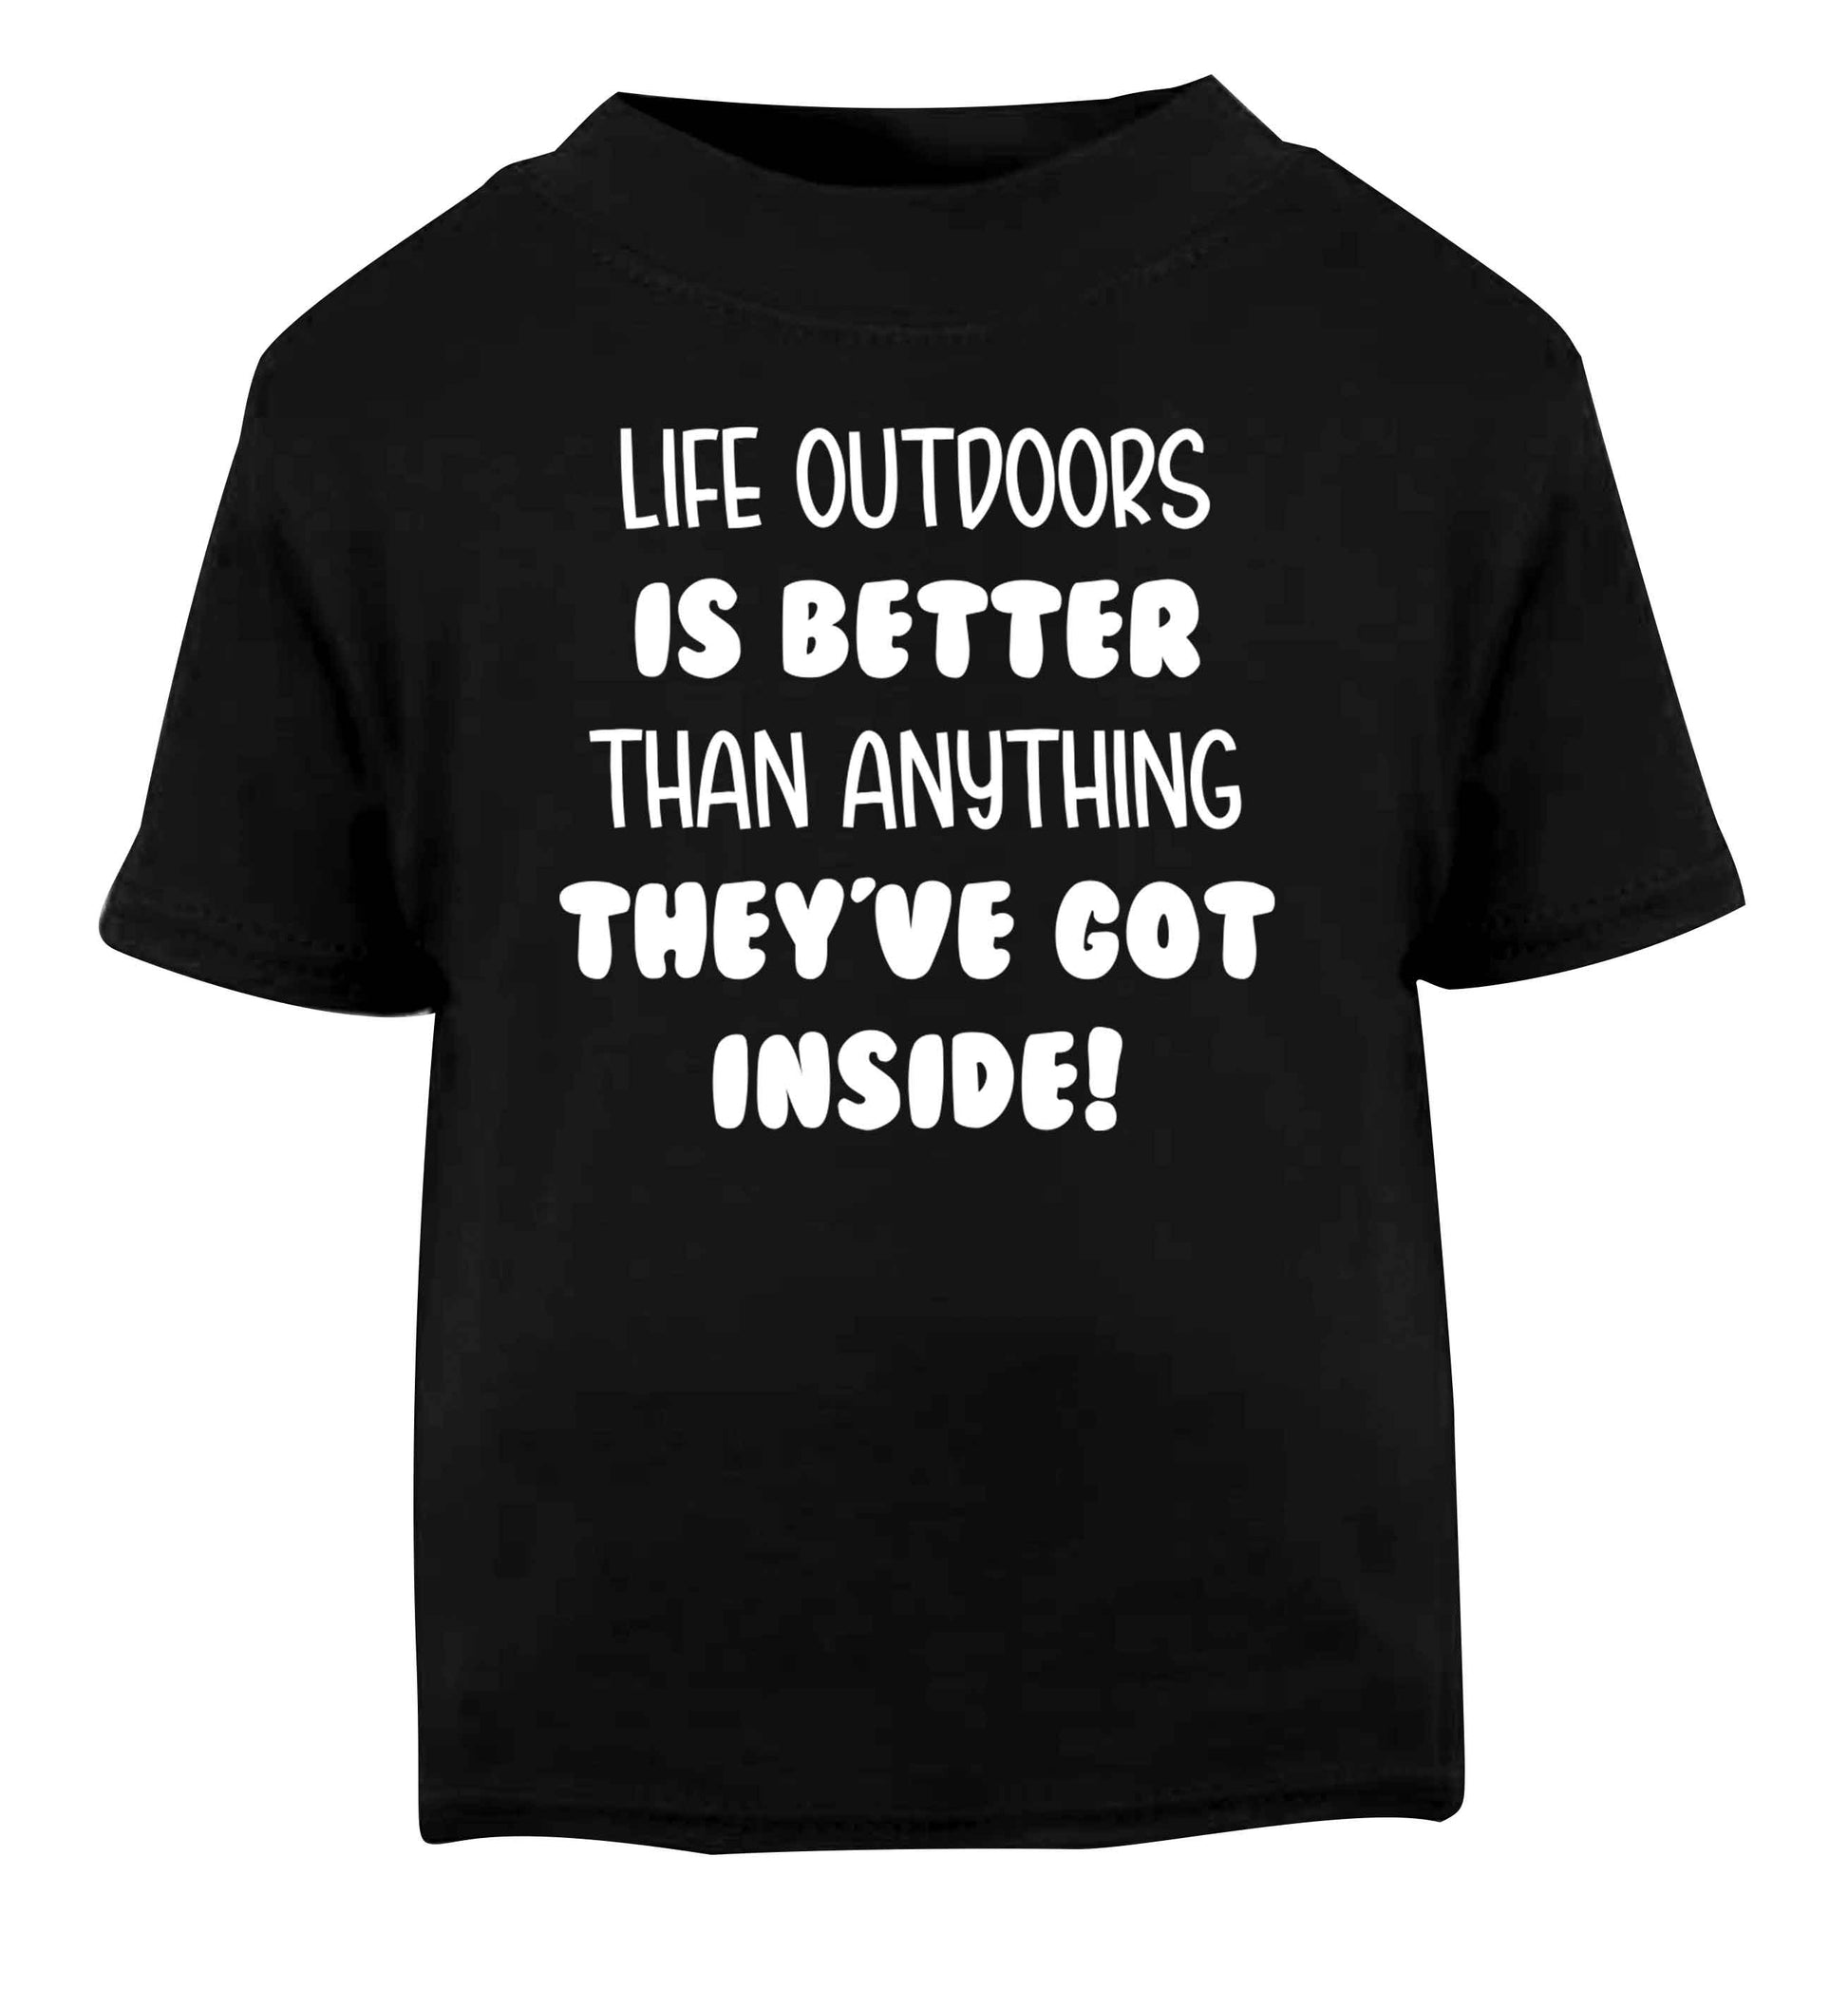 Life outdoors is better than anything they've go inside Black Baby Toddler Tshirt 2 years